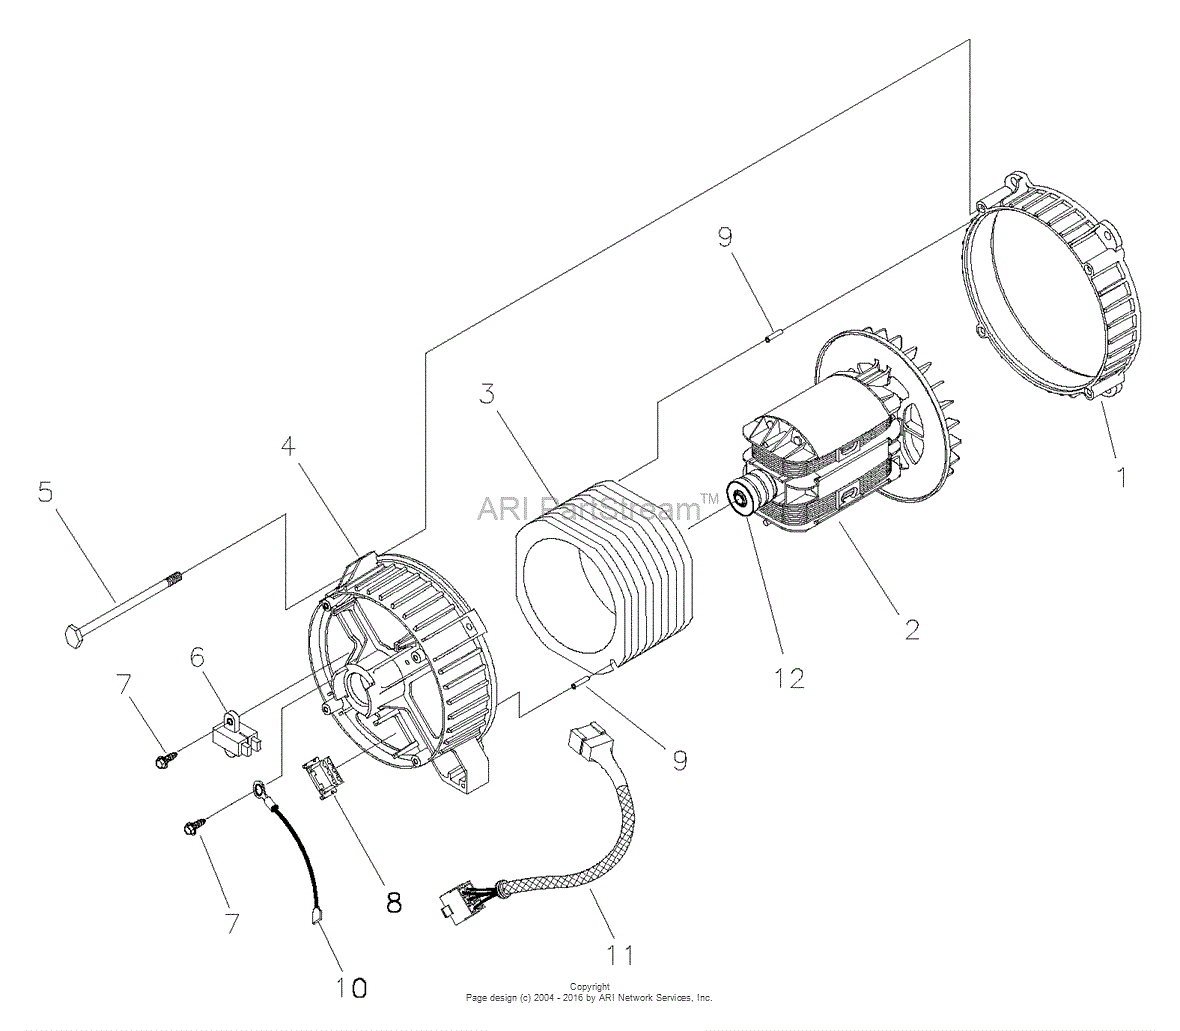 Wiring Diagram For A Chevy Alternator from az417944.vo.msecnd.net